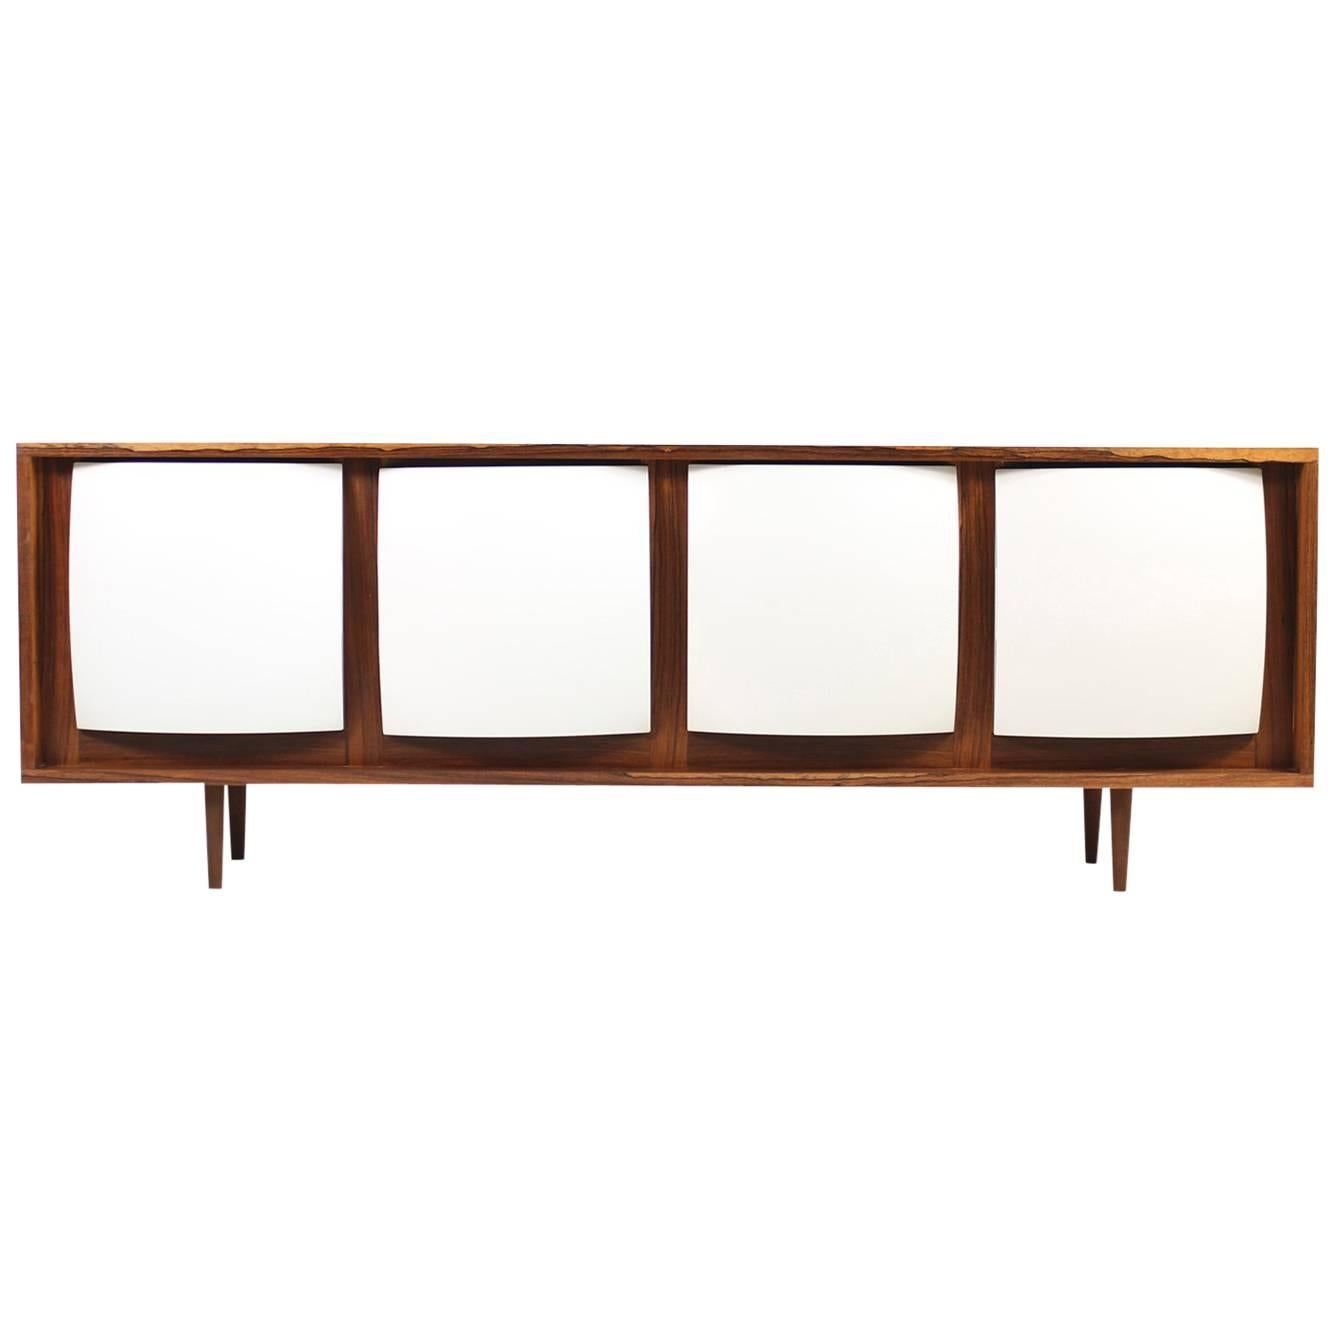 Super Rare 1970s Rosewood Sideboard with White Curved Formica Doors Single Piece